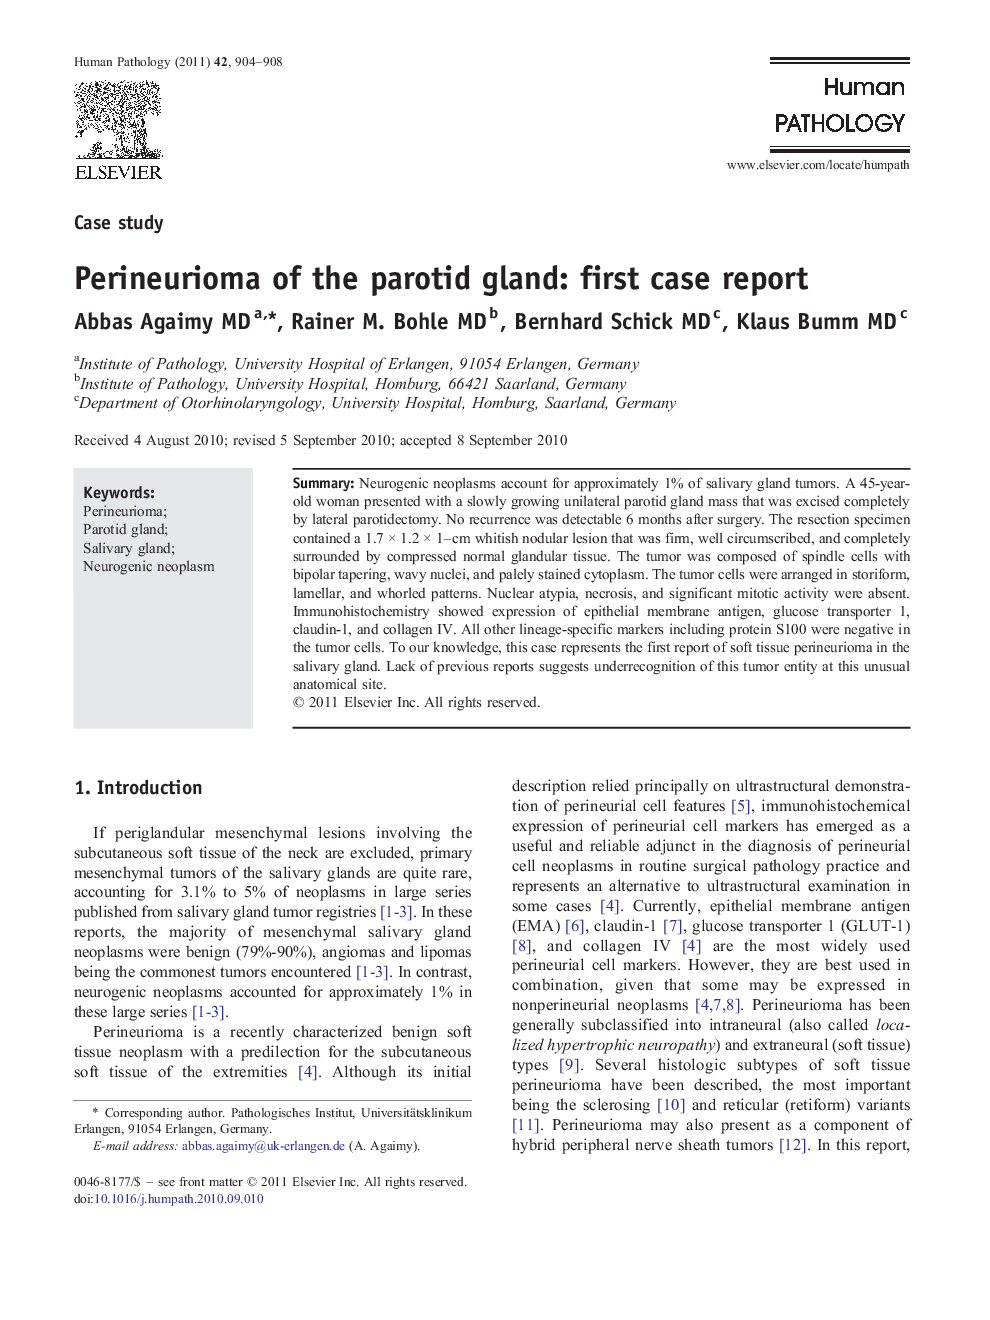 Perineurioma of the parotid gland: first case report